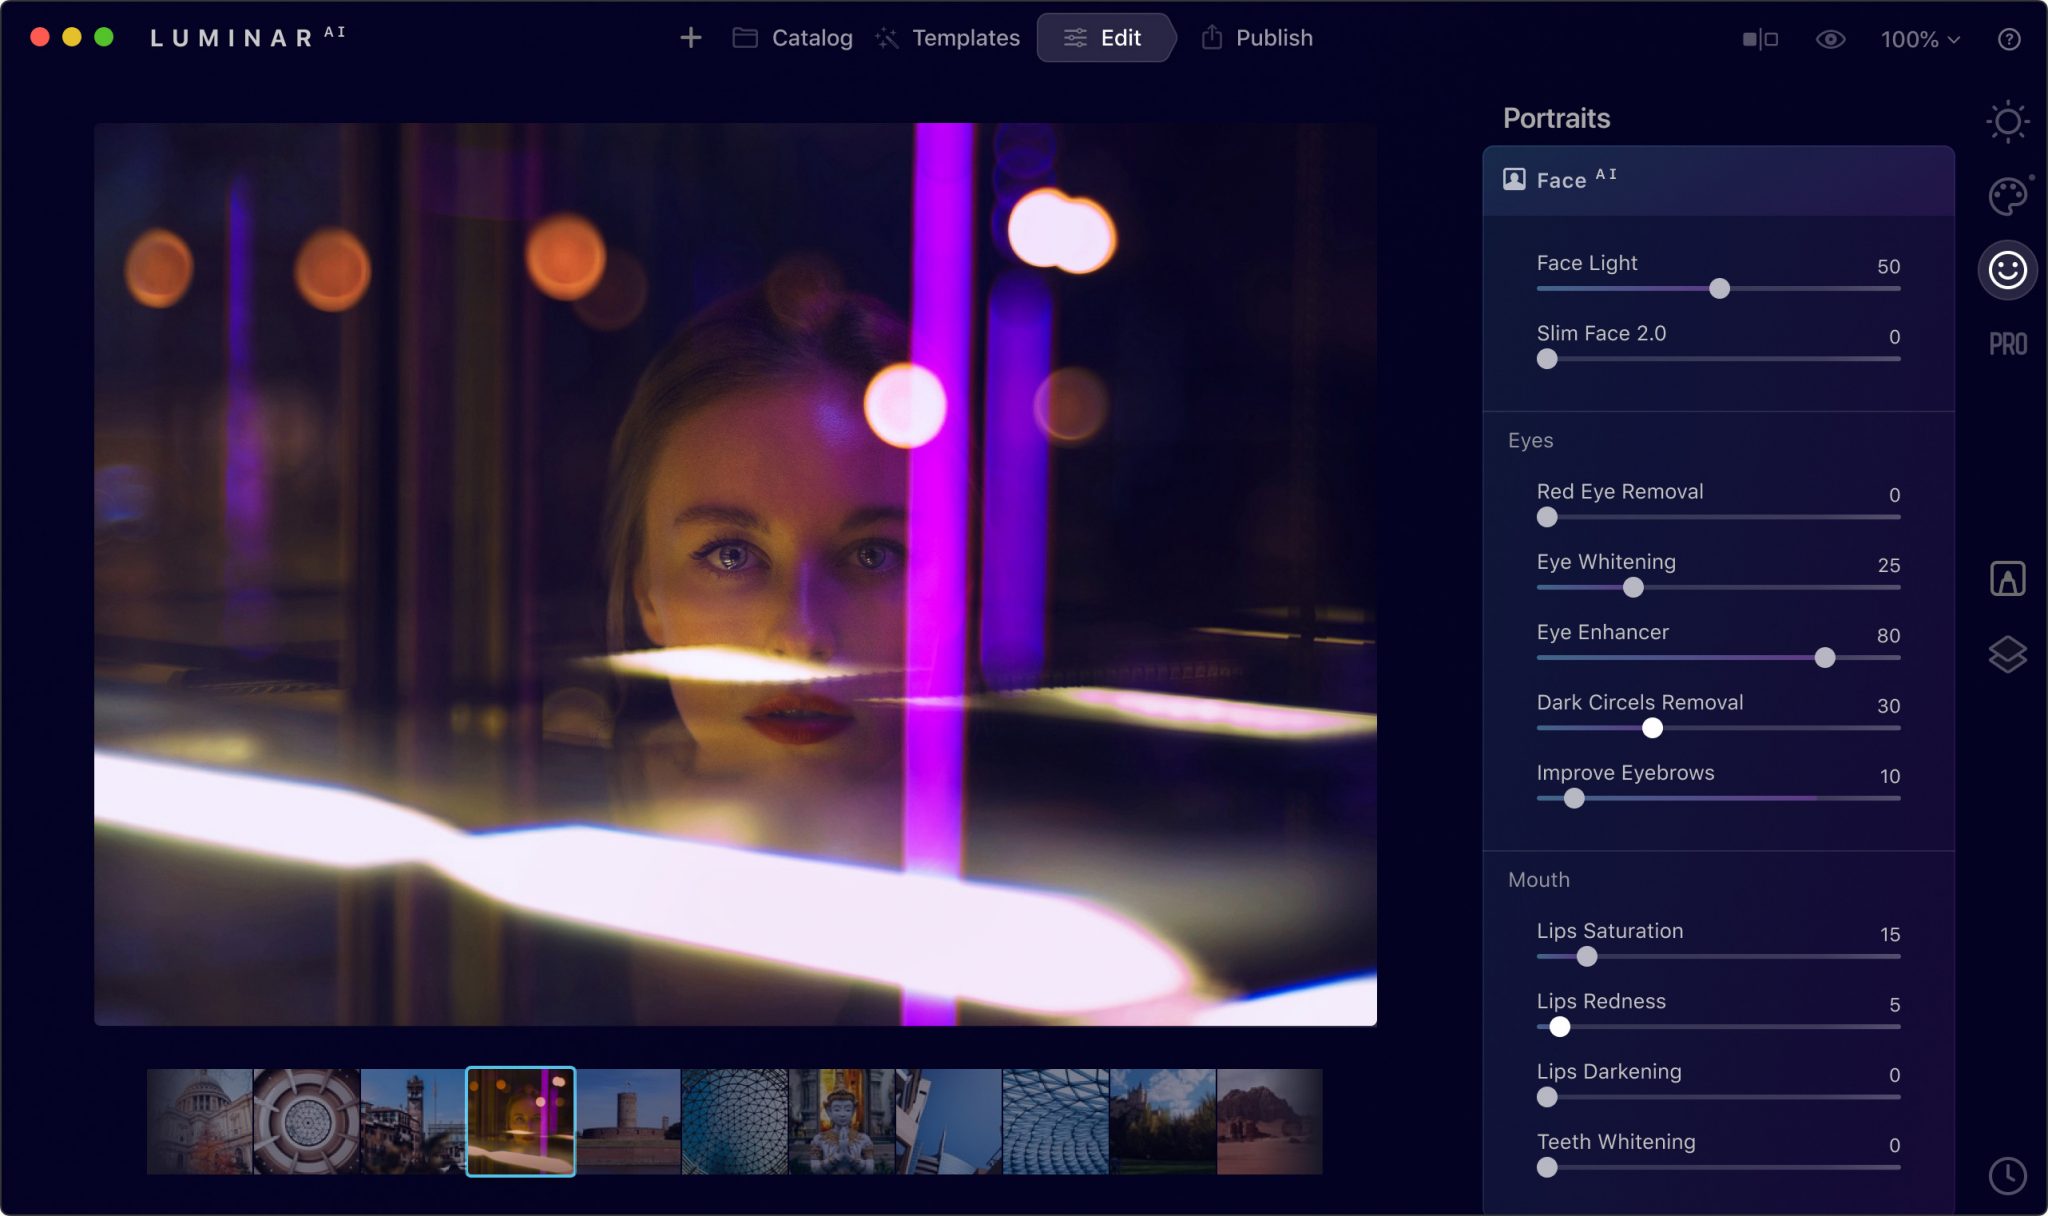 Luminar Neo 1.11.0.11589 instal the new version for windows